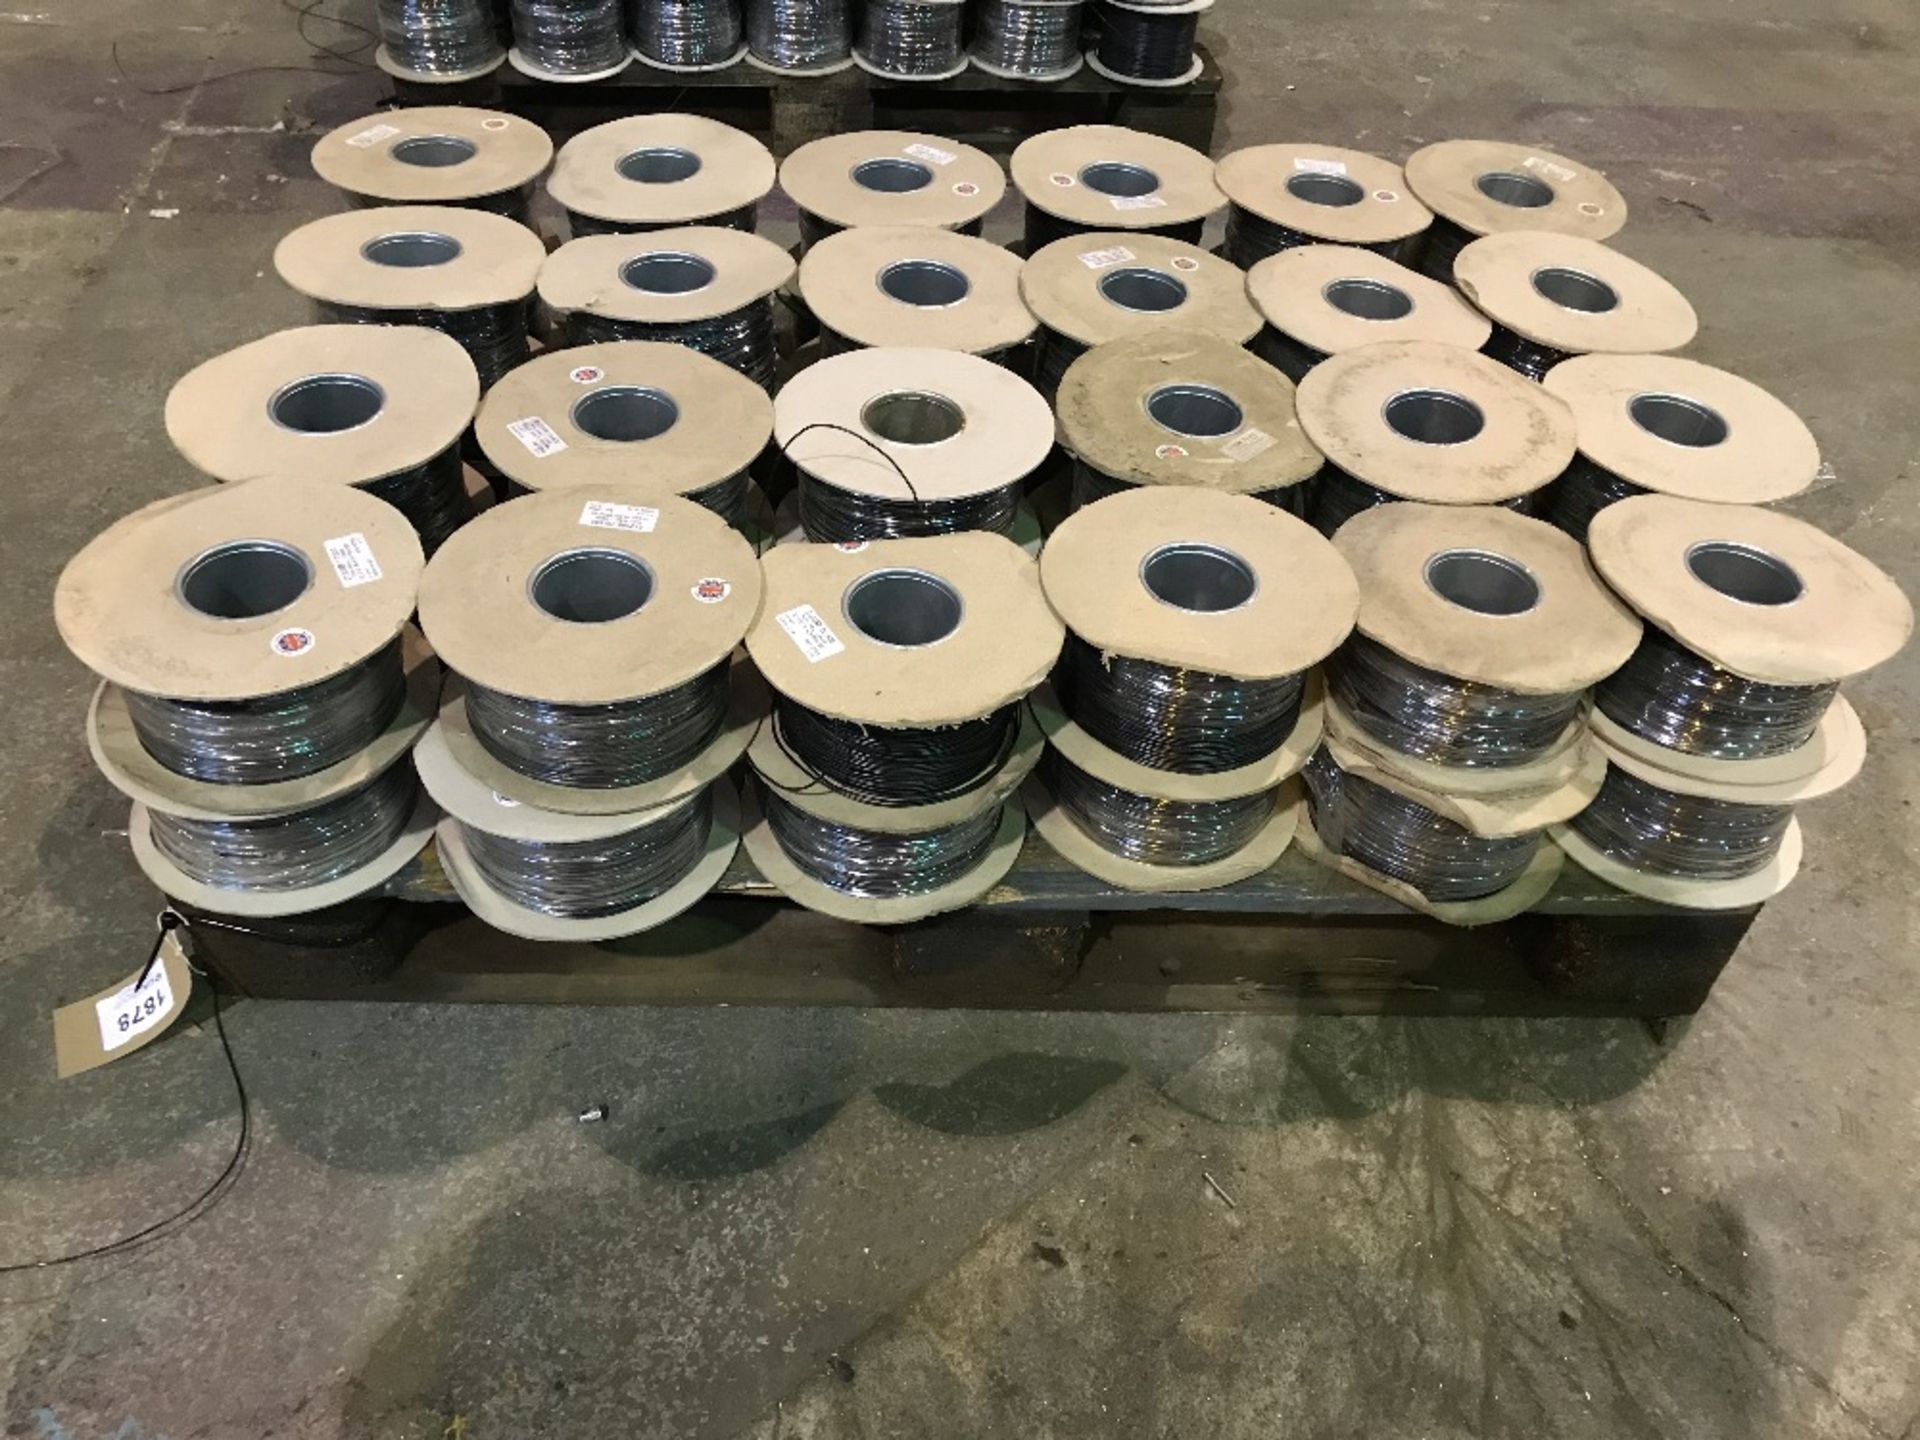 Approximately (48) Spools of 500 Metre Various Size and Colour S1209B Thin Wall Electrical Cable